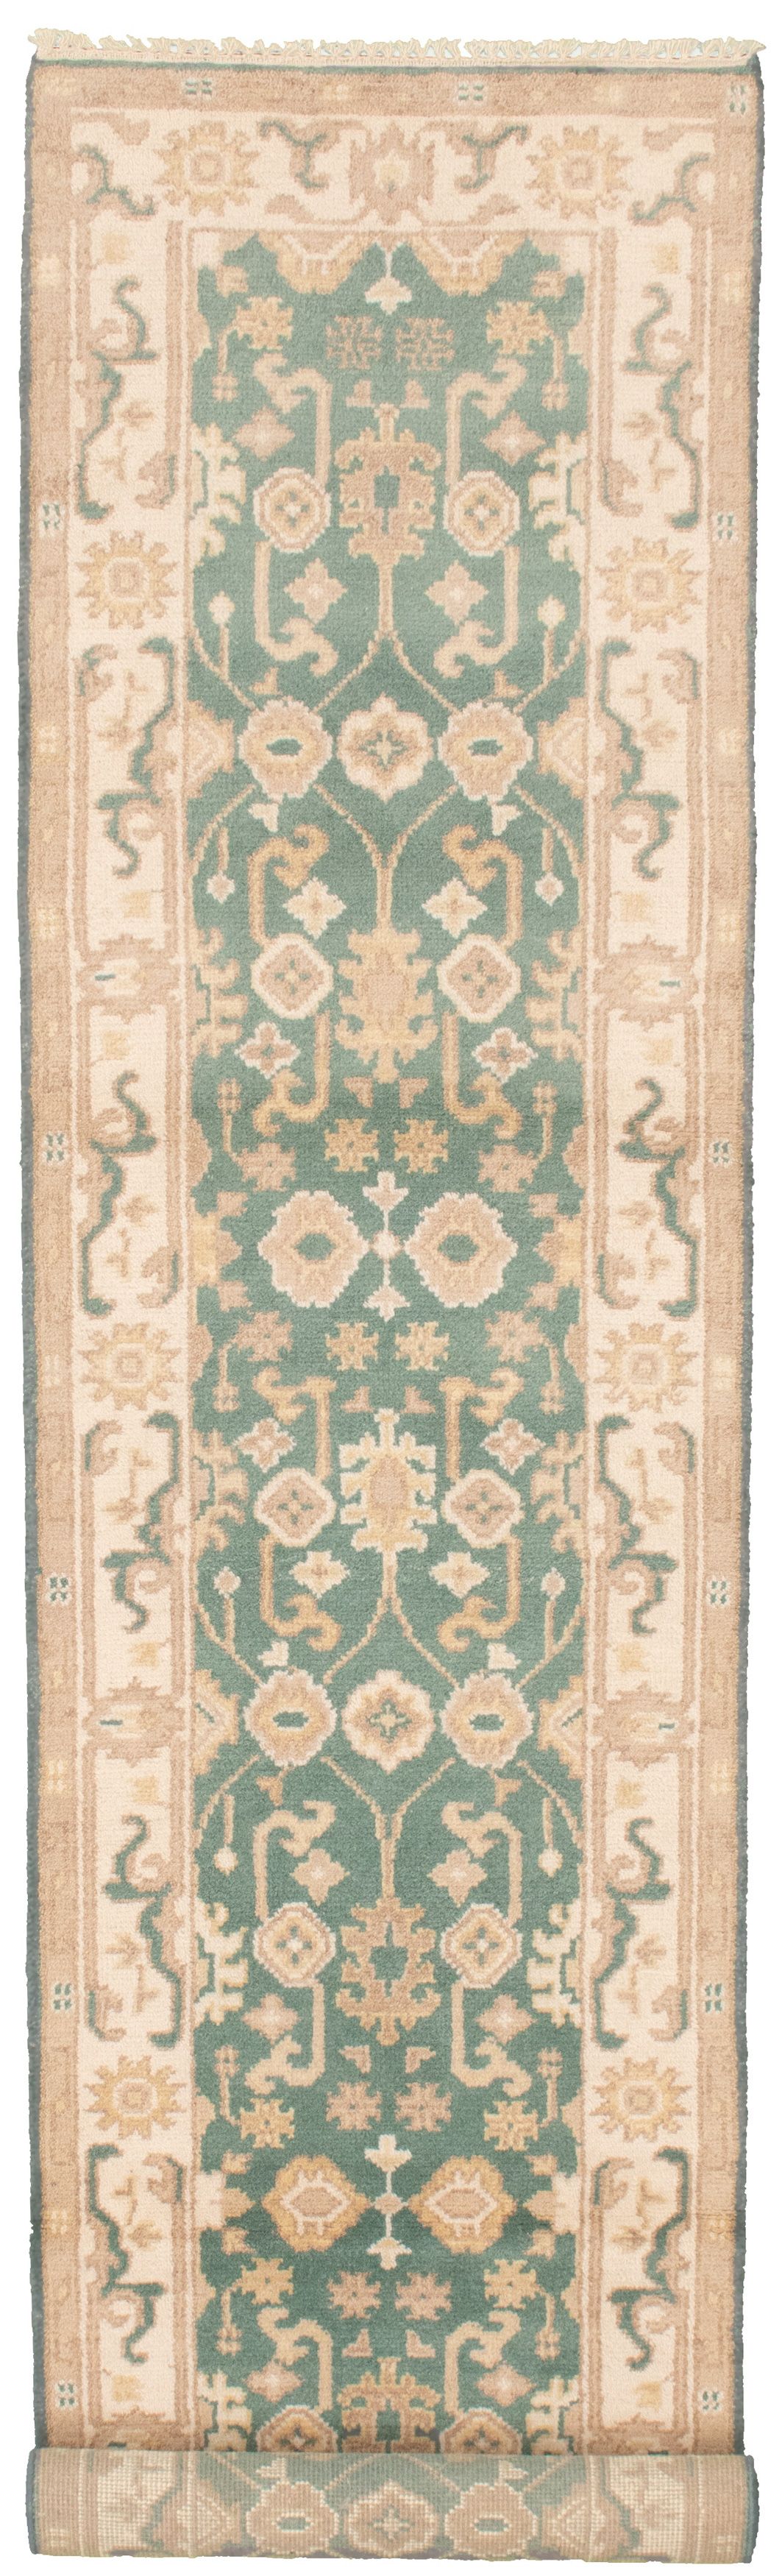 Hand-knotted Royal Ushak Teal Wool Rug 2'7" x 11'10" Size: 2'7" x 11'10"  